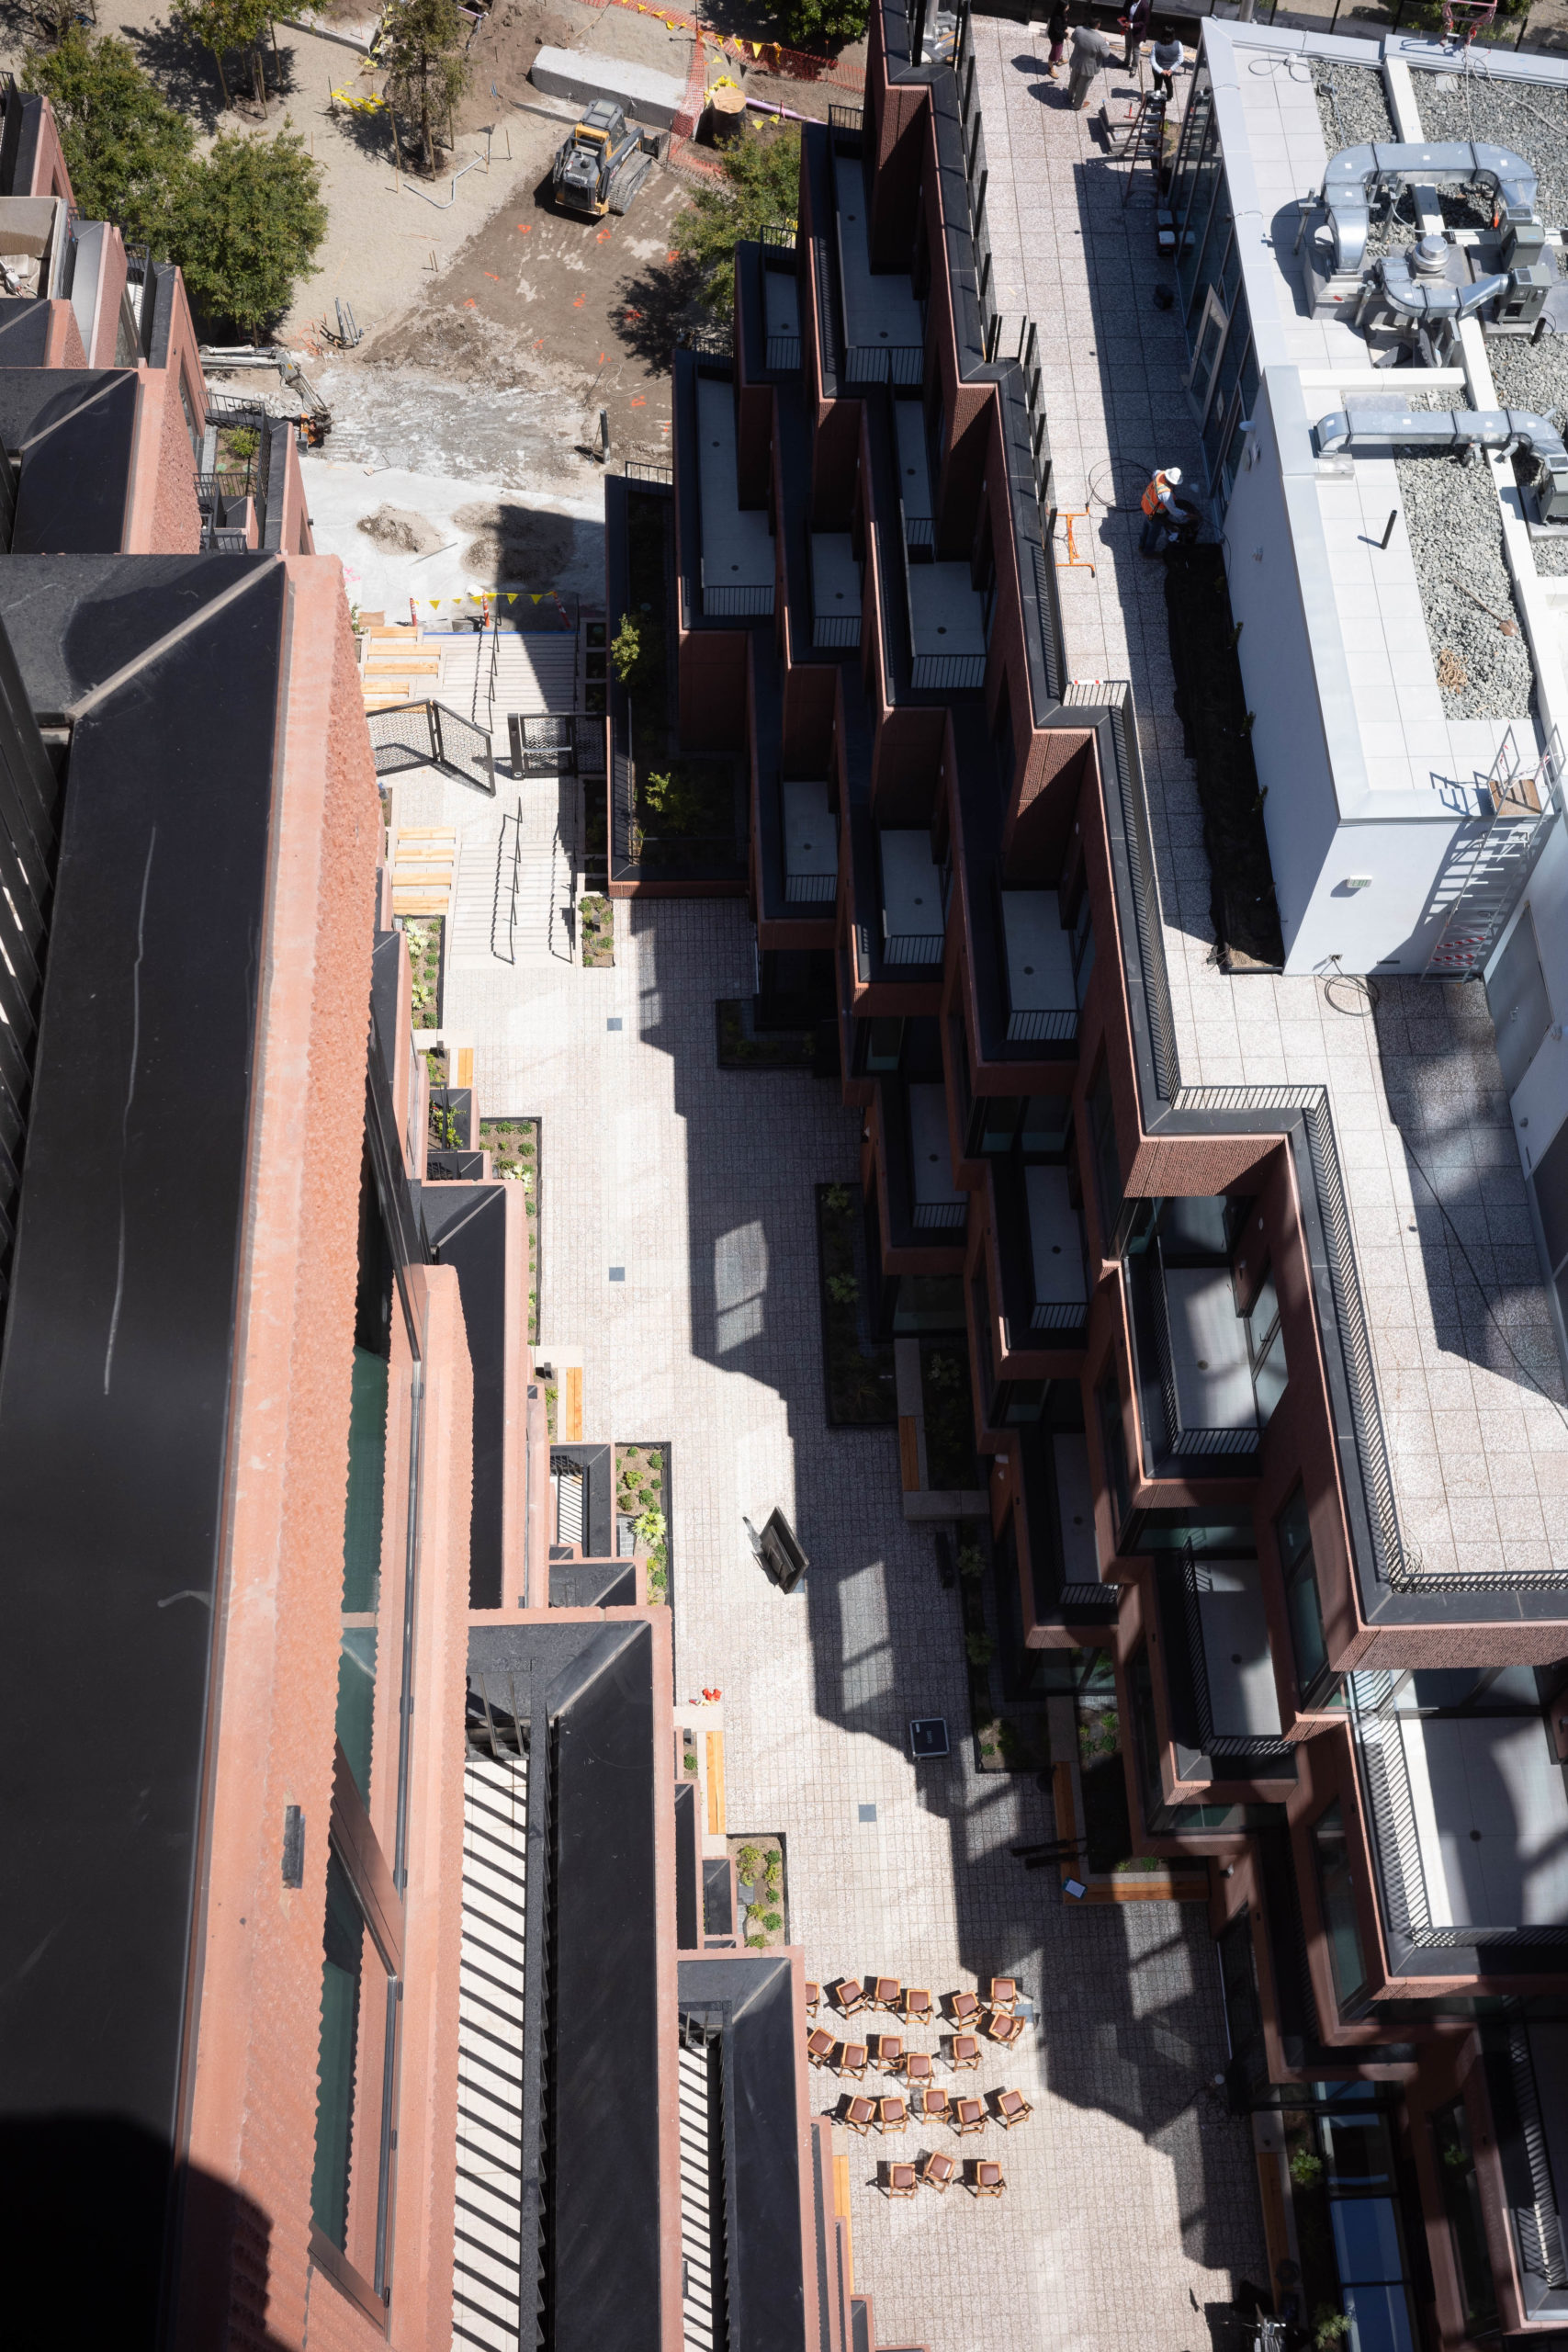 View looking down from an apartment on Floor 16 of The Canyon, image by Andrew Campbell Nelson